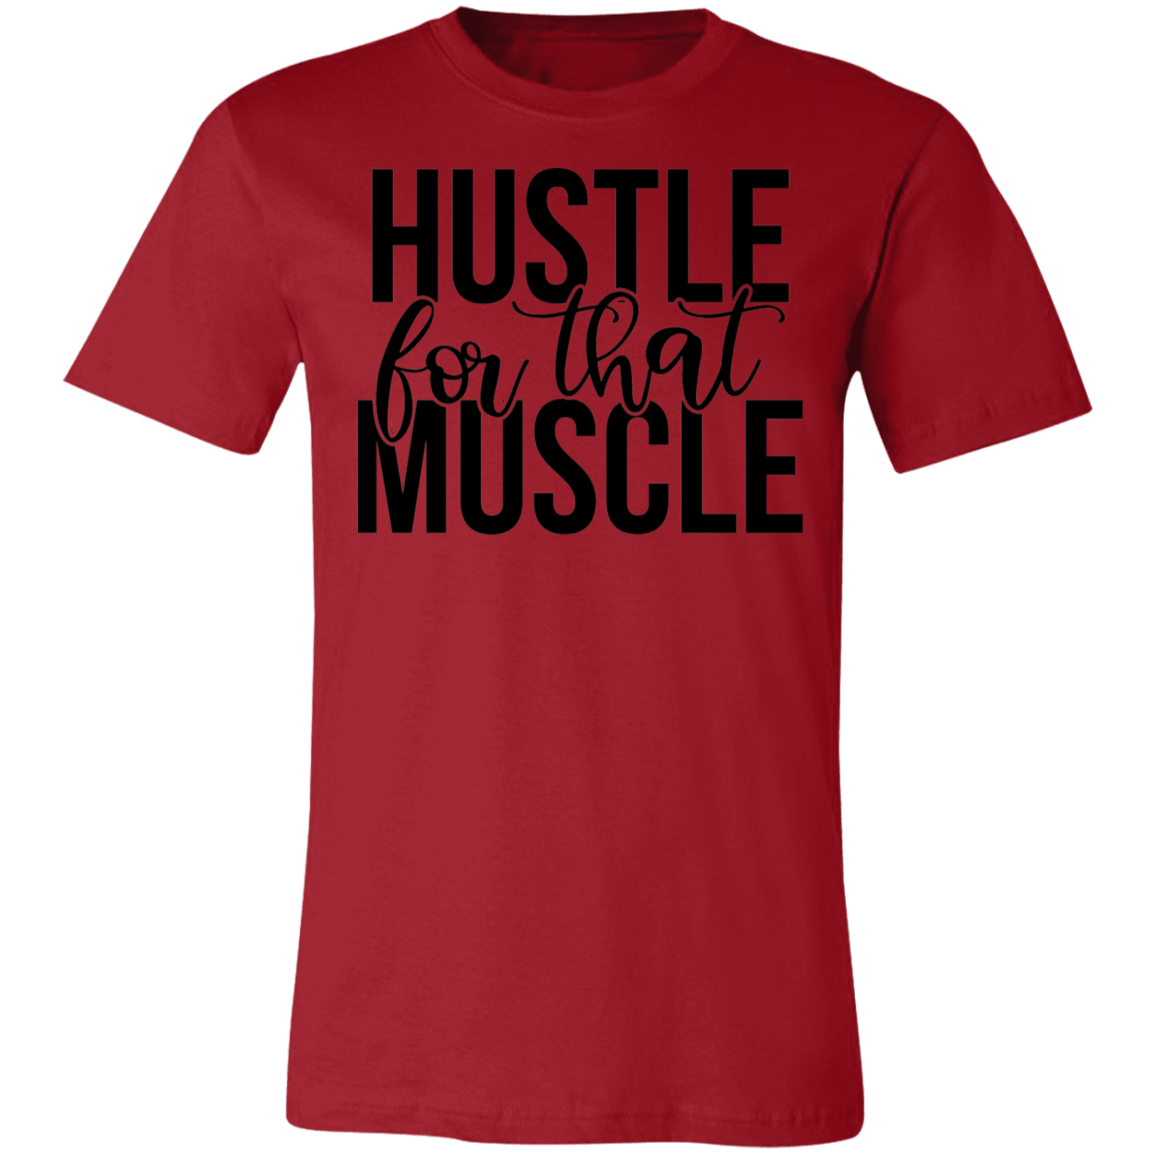 Hustle For Muscle Tee